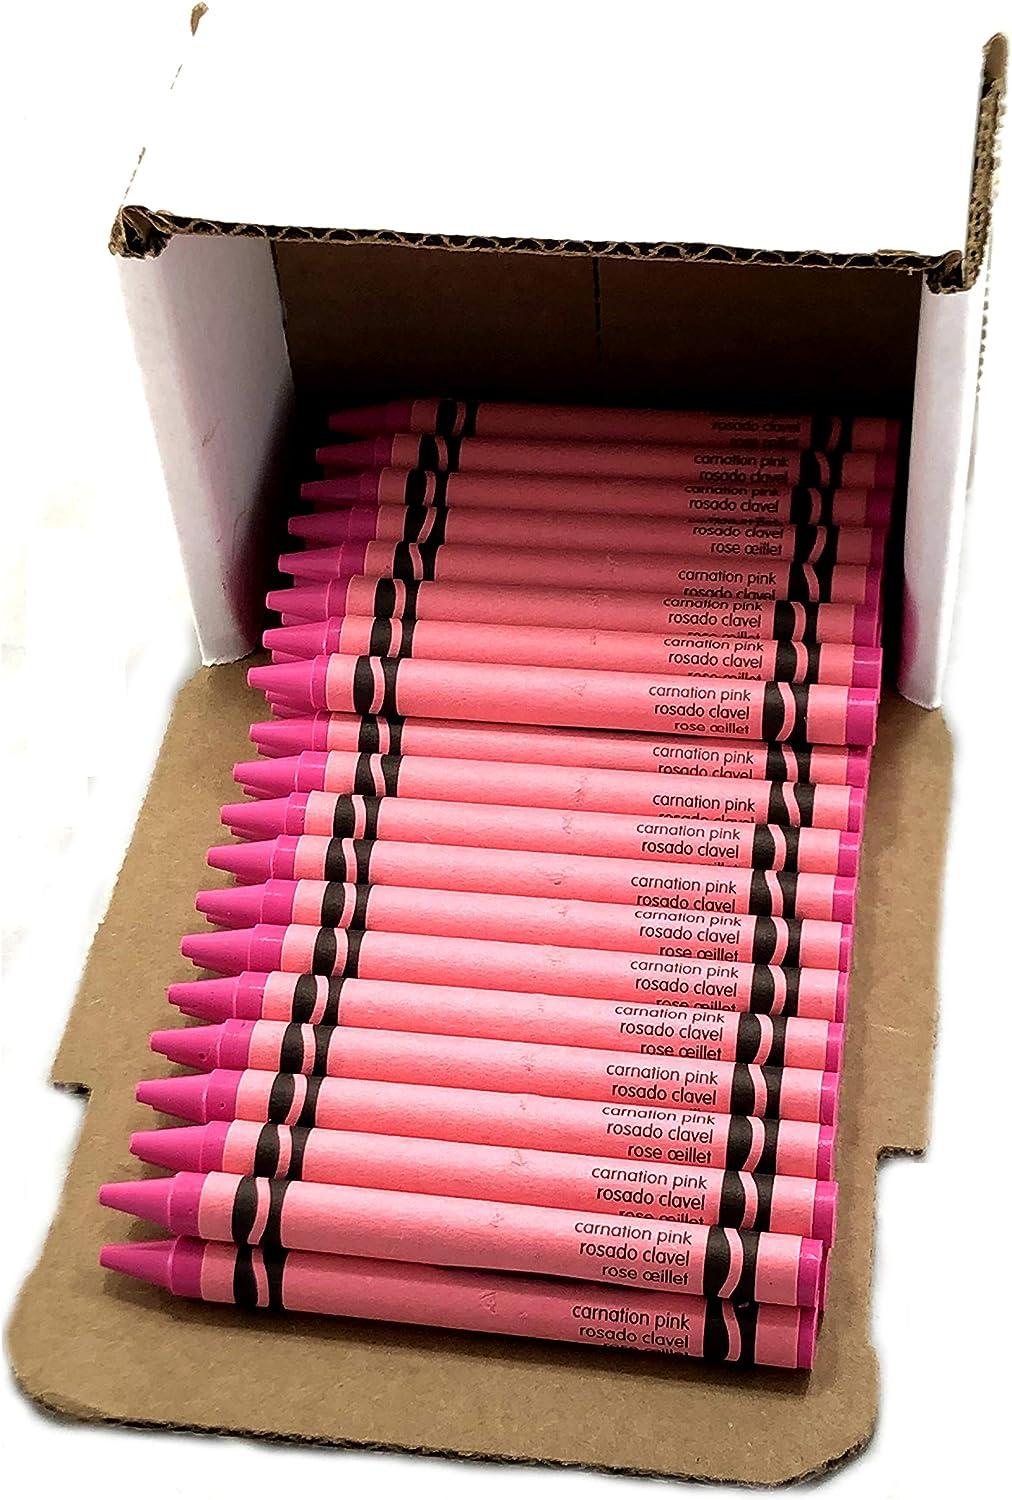 BULK CRAYOLA CRAYONS - 50 Count - Carnation Pink - Great for Crafts -  School $10.00 - PicClick